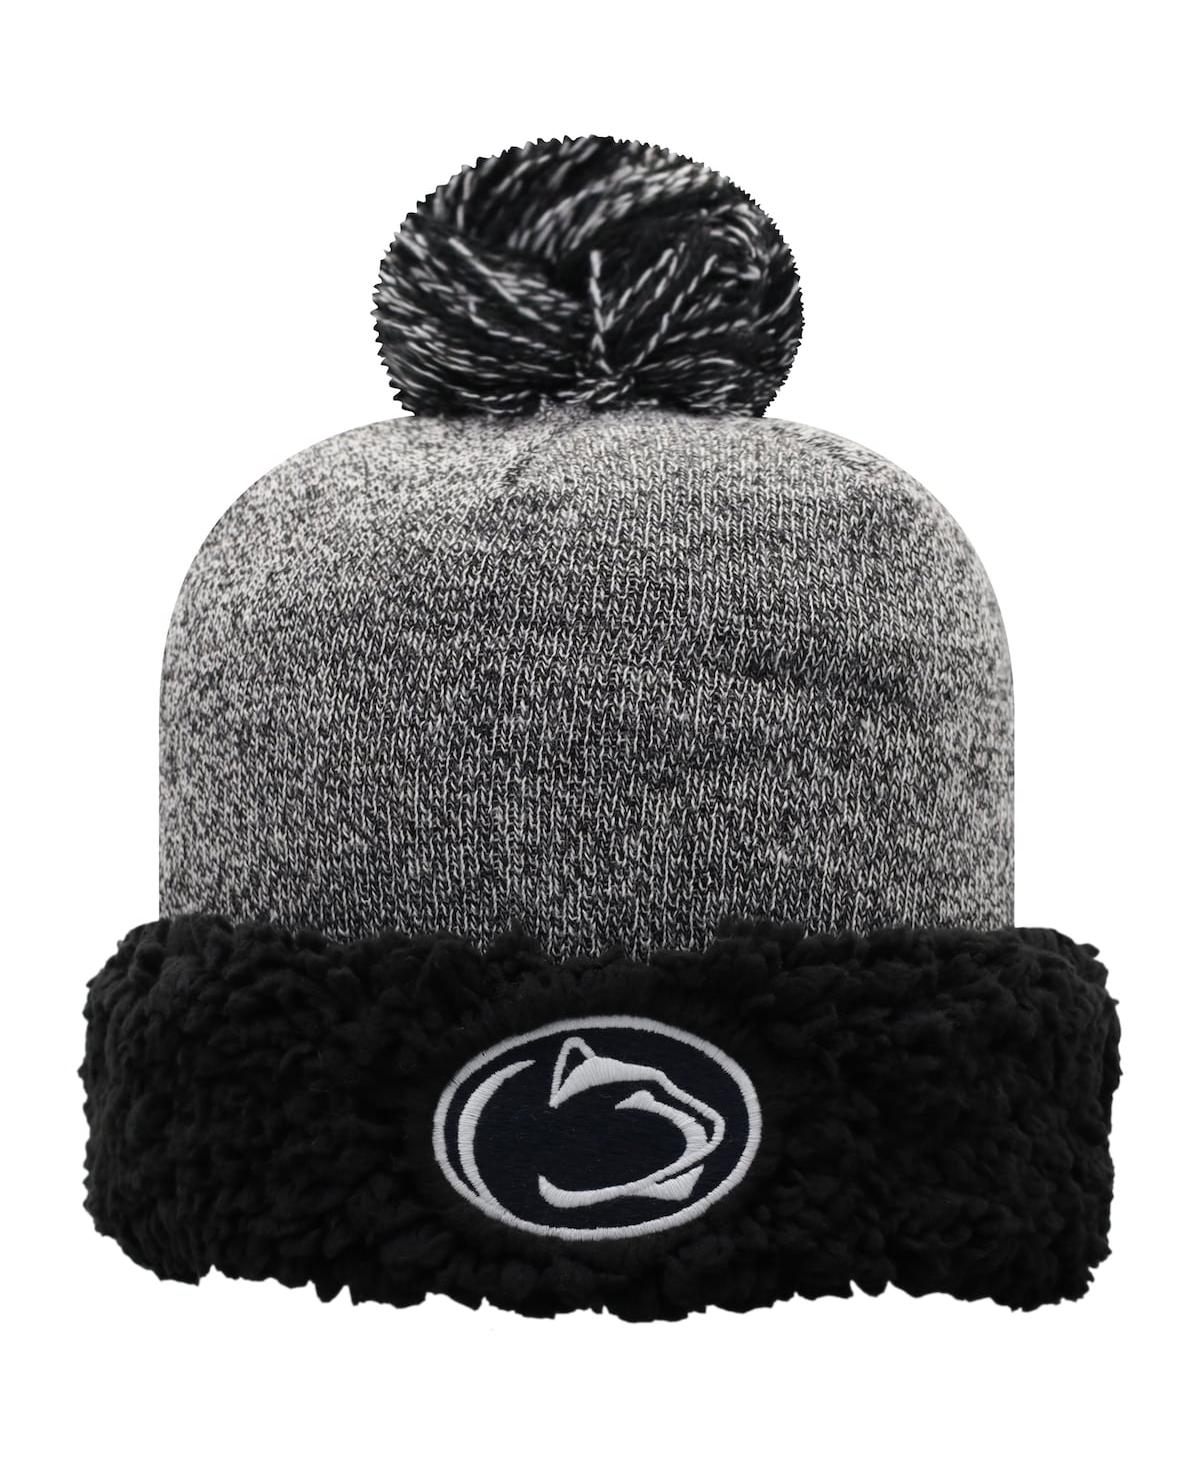 Shop Top Of The World Women's  Black Penn State Nittany Lions Snug Cuffed Knit Hat With Pom